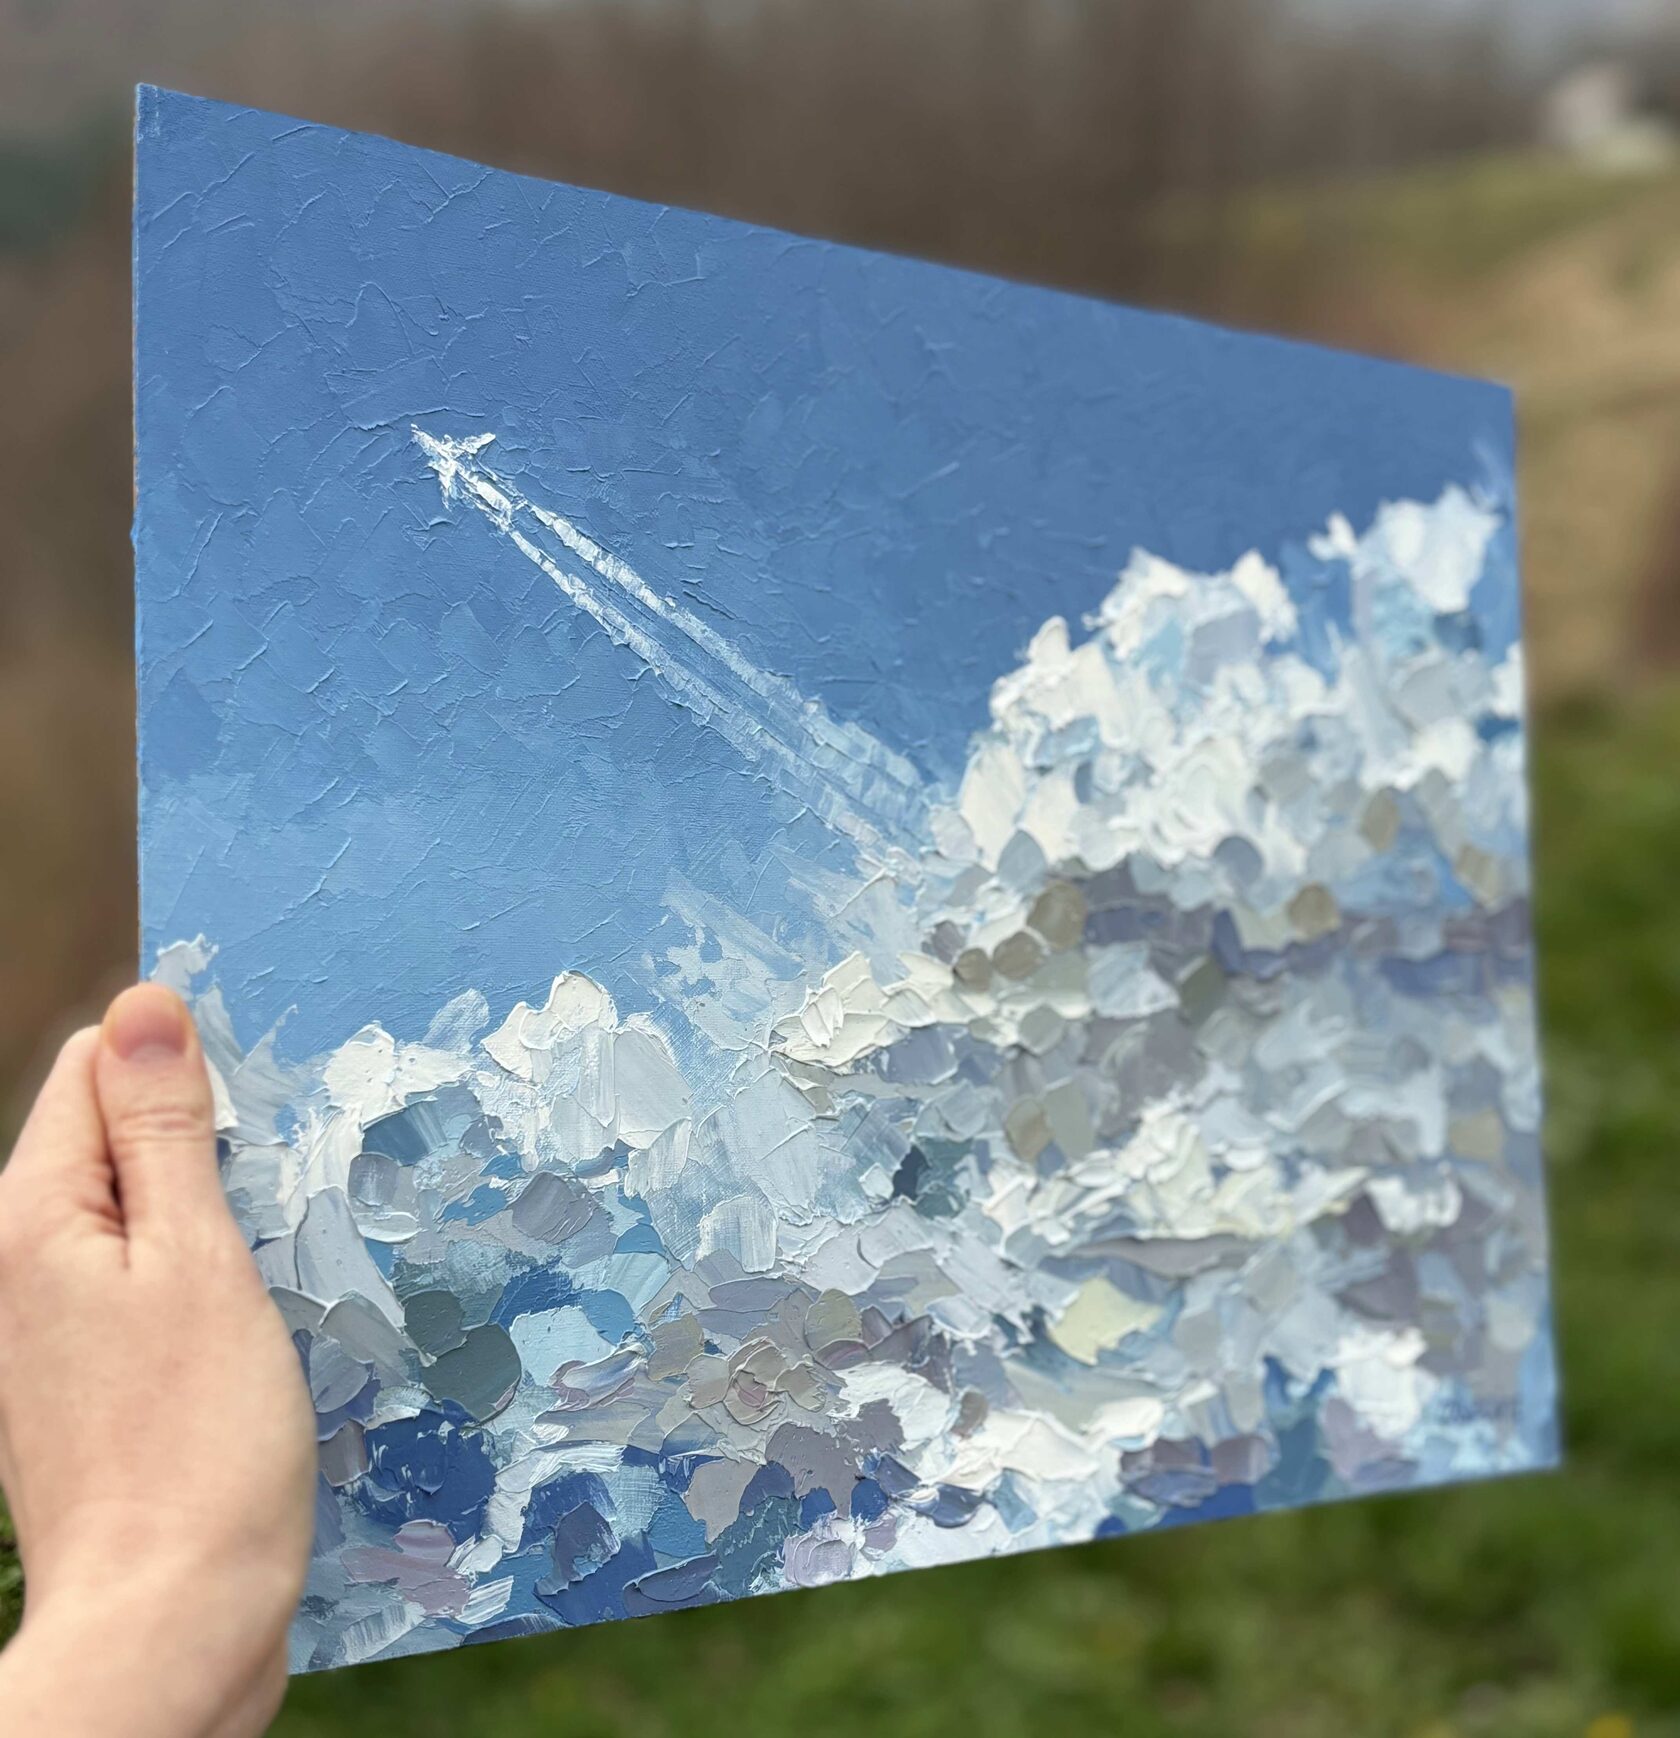 Airplane in the clouds oil painting, cloud abstract art, sky knife painting, artist OXYPOINT Oxana Kravtsova, painting for sale 